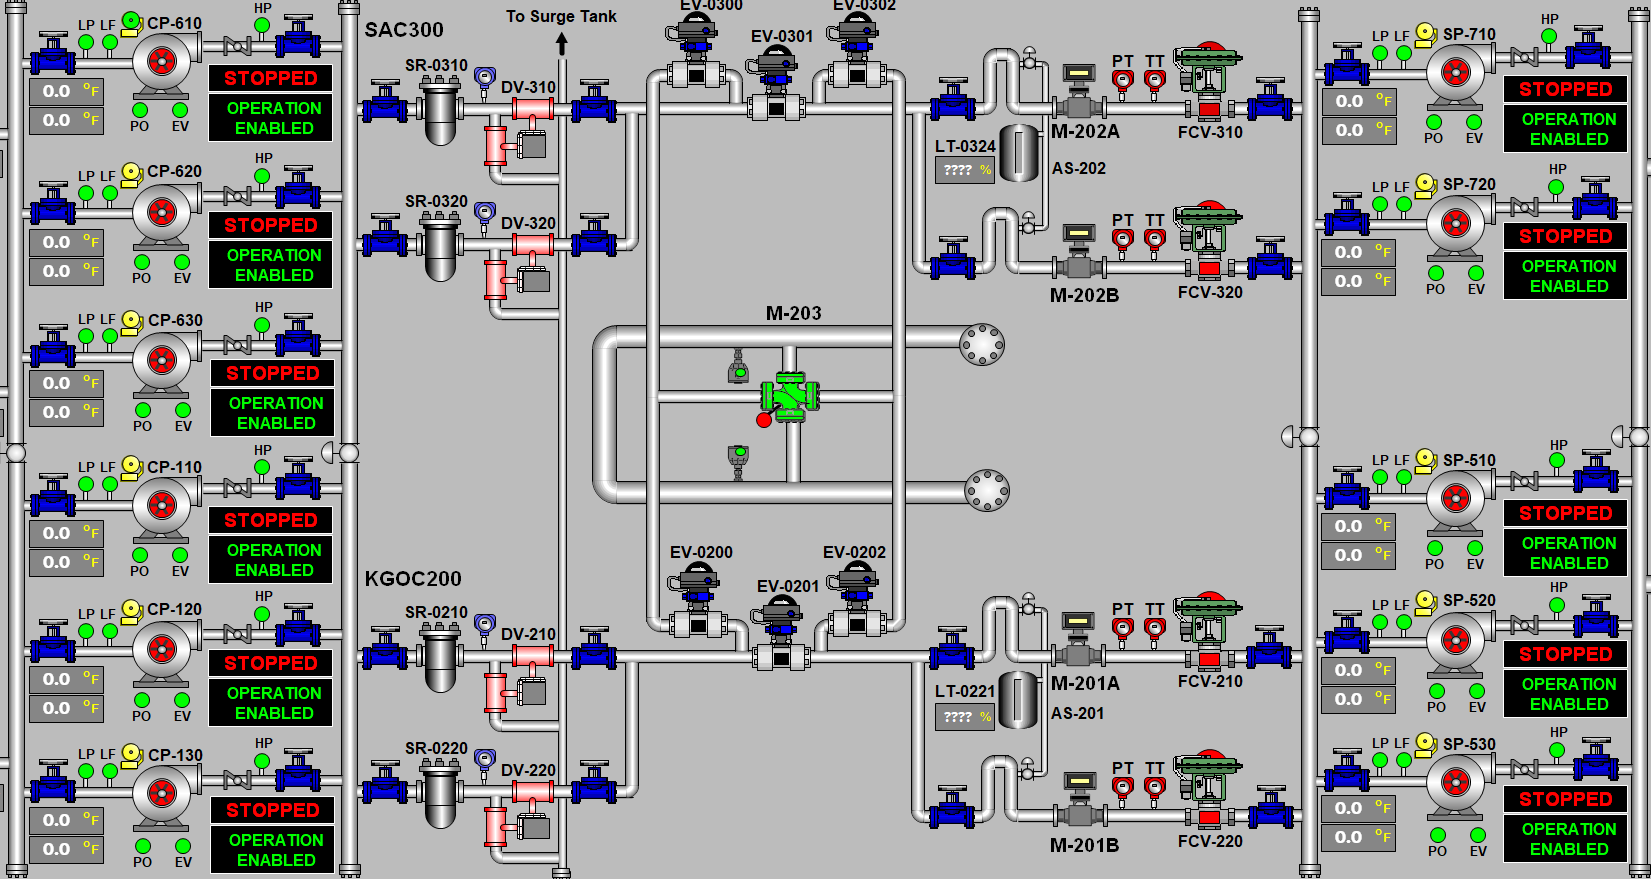 Upgrade of Metering Control system